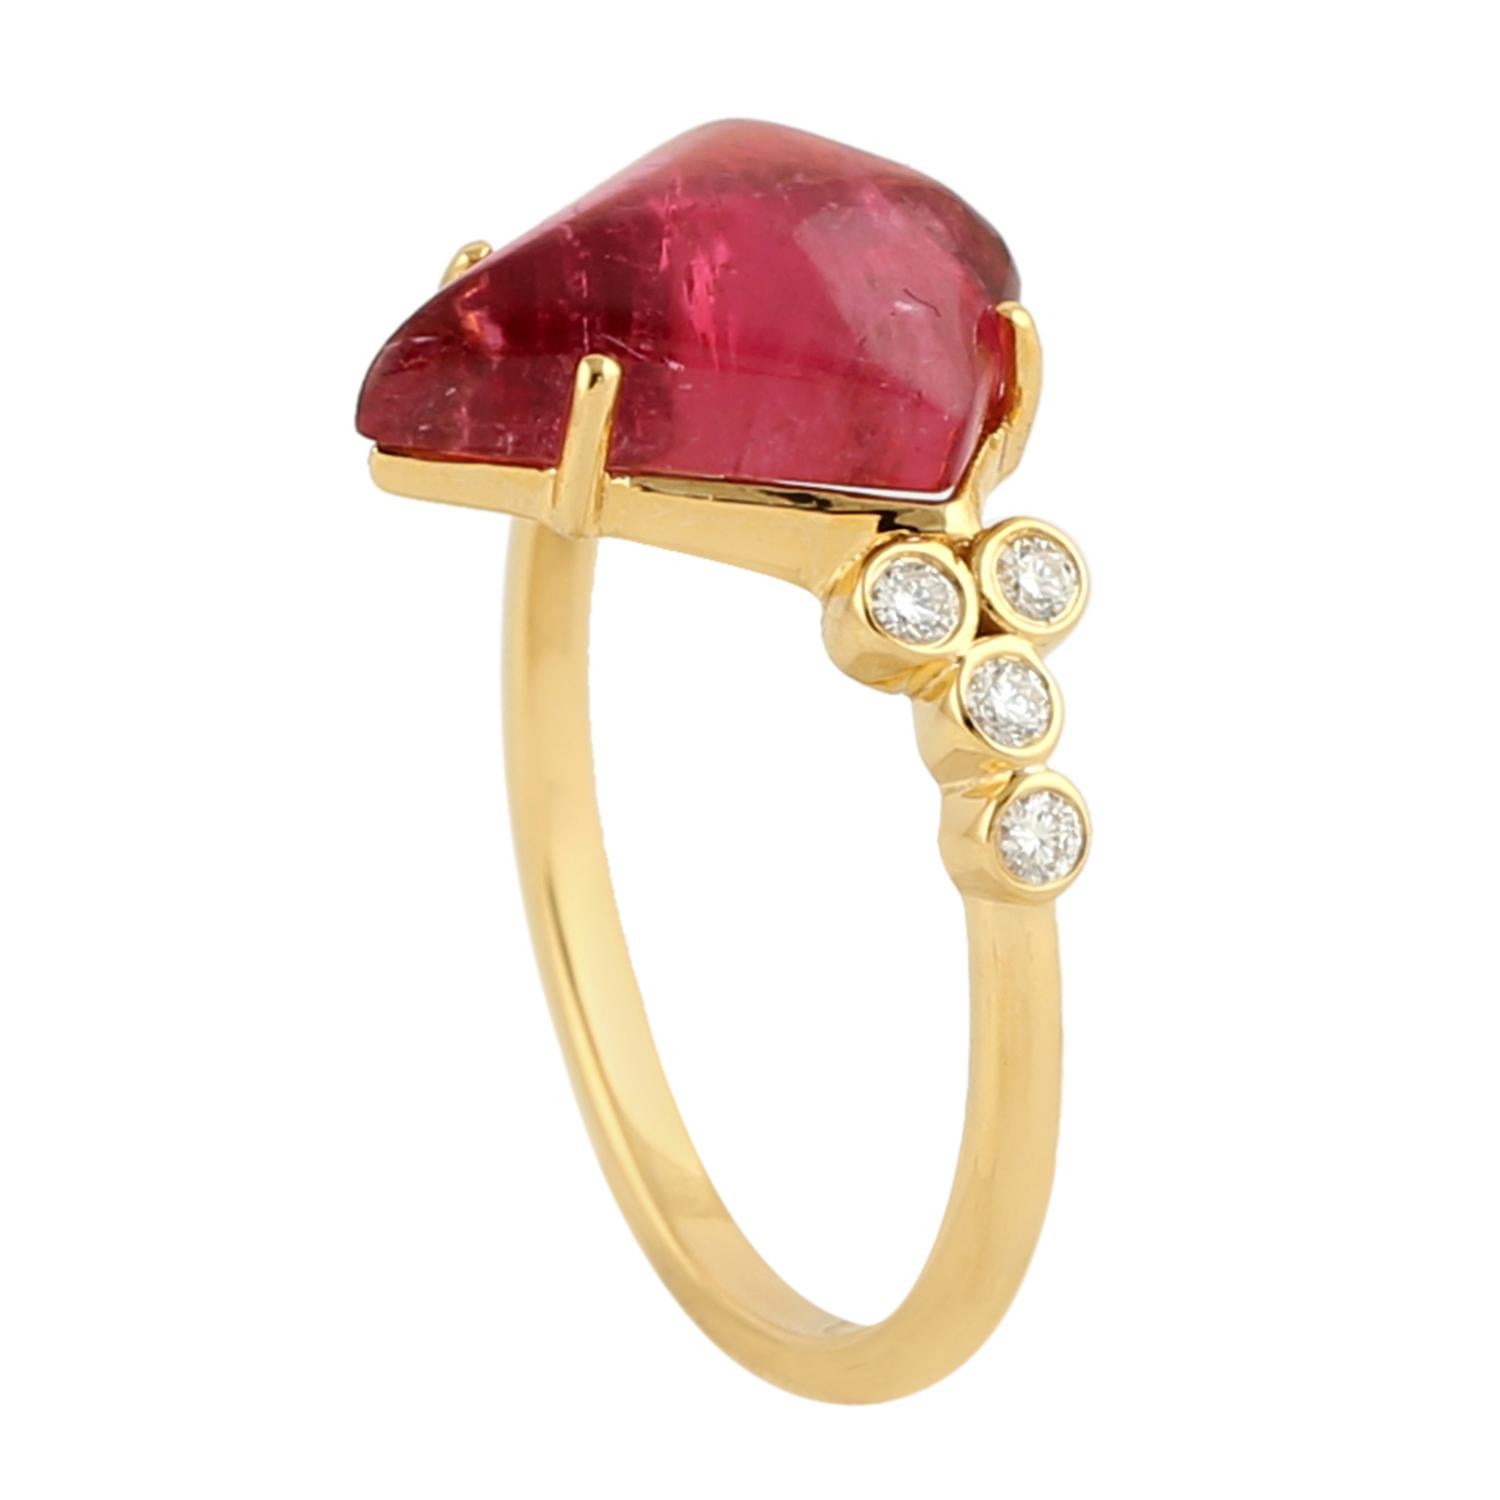 Mixed Cut Tourmaline Ring With Diamonds Made In 18k Yellow Gold For Sale